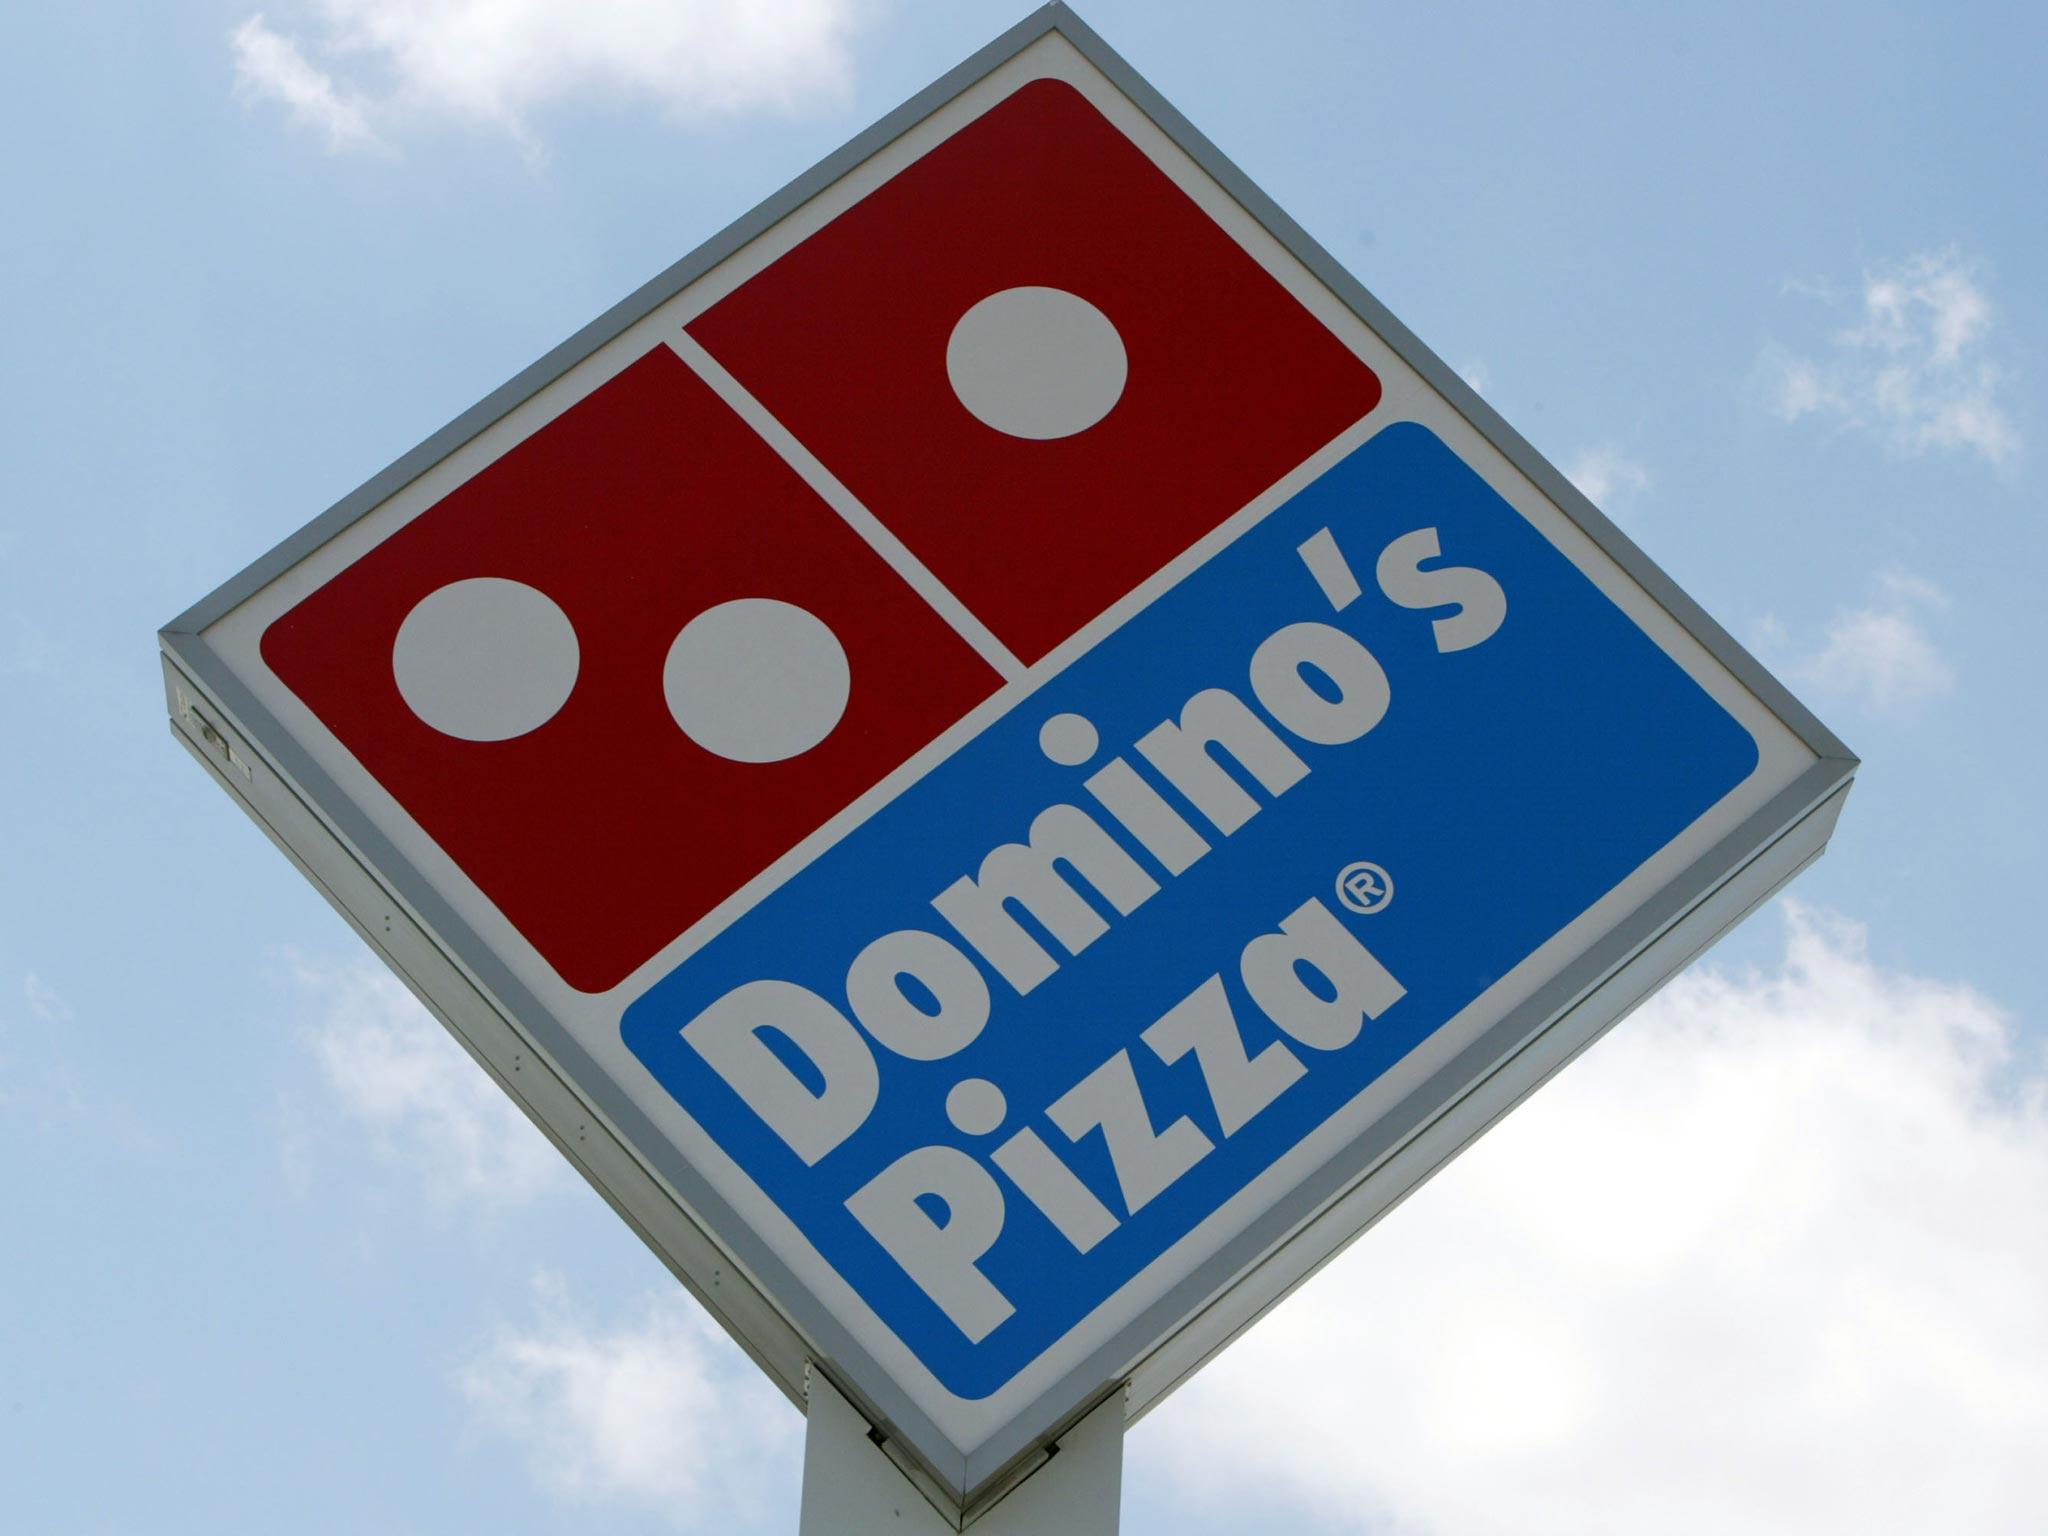 Domino's Old Logo - Domino's Pizza sales up 19% thanks to mobile app | The Independent